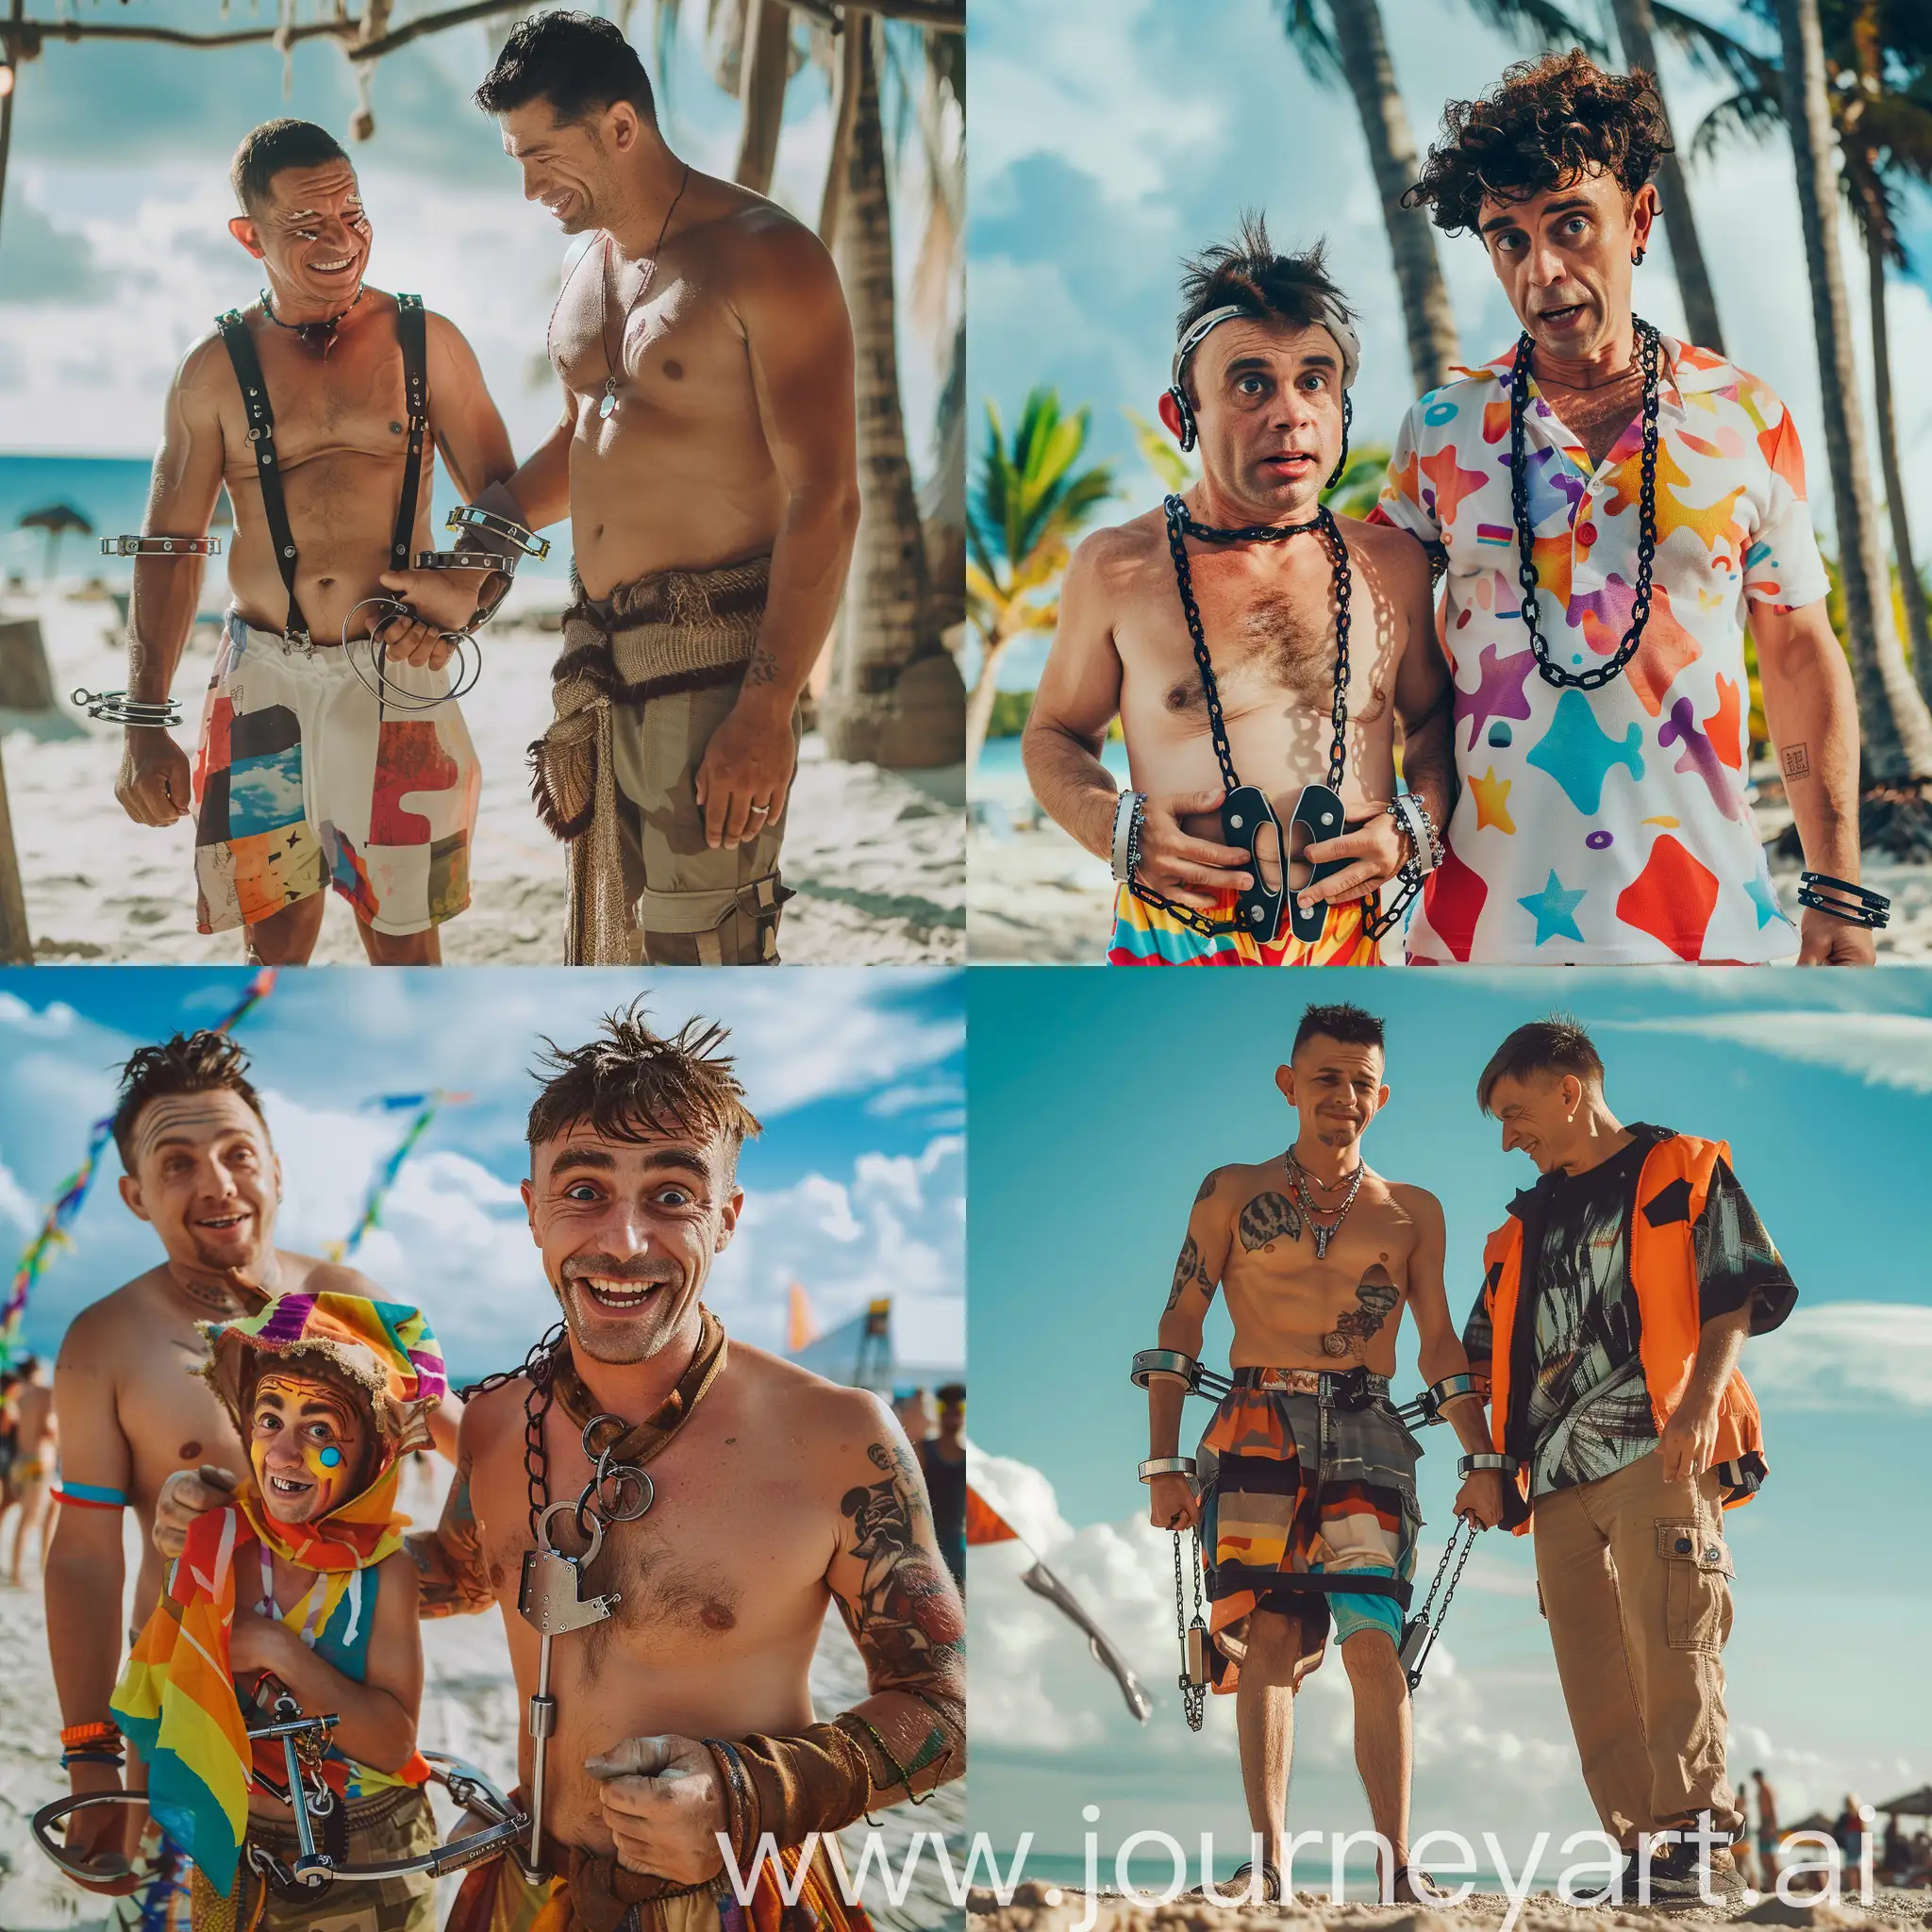 Dwarf-Man-in-Costume-Handcuffed-to-Tall-Man-on-Beach-Party